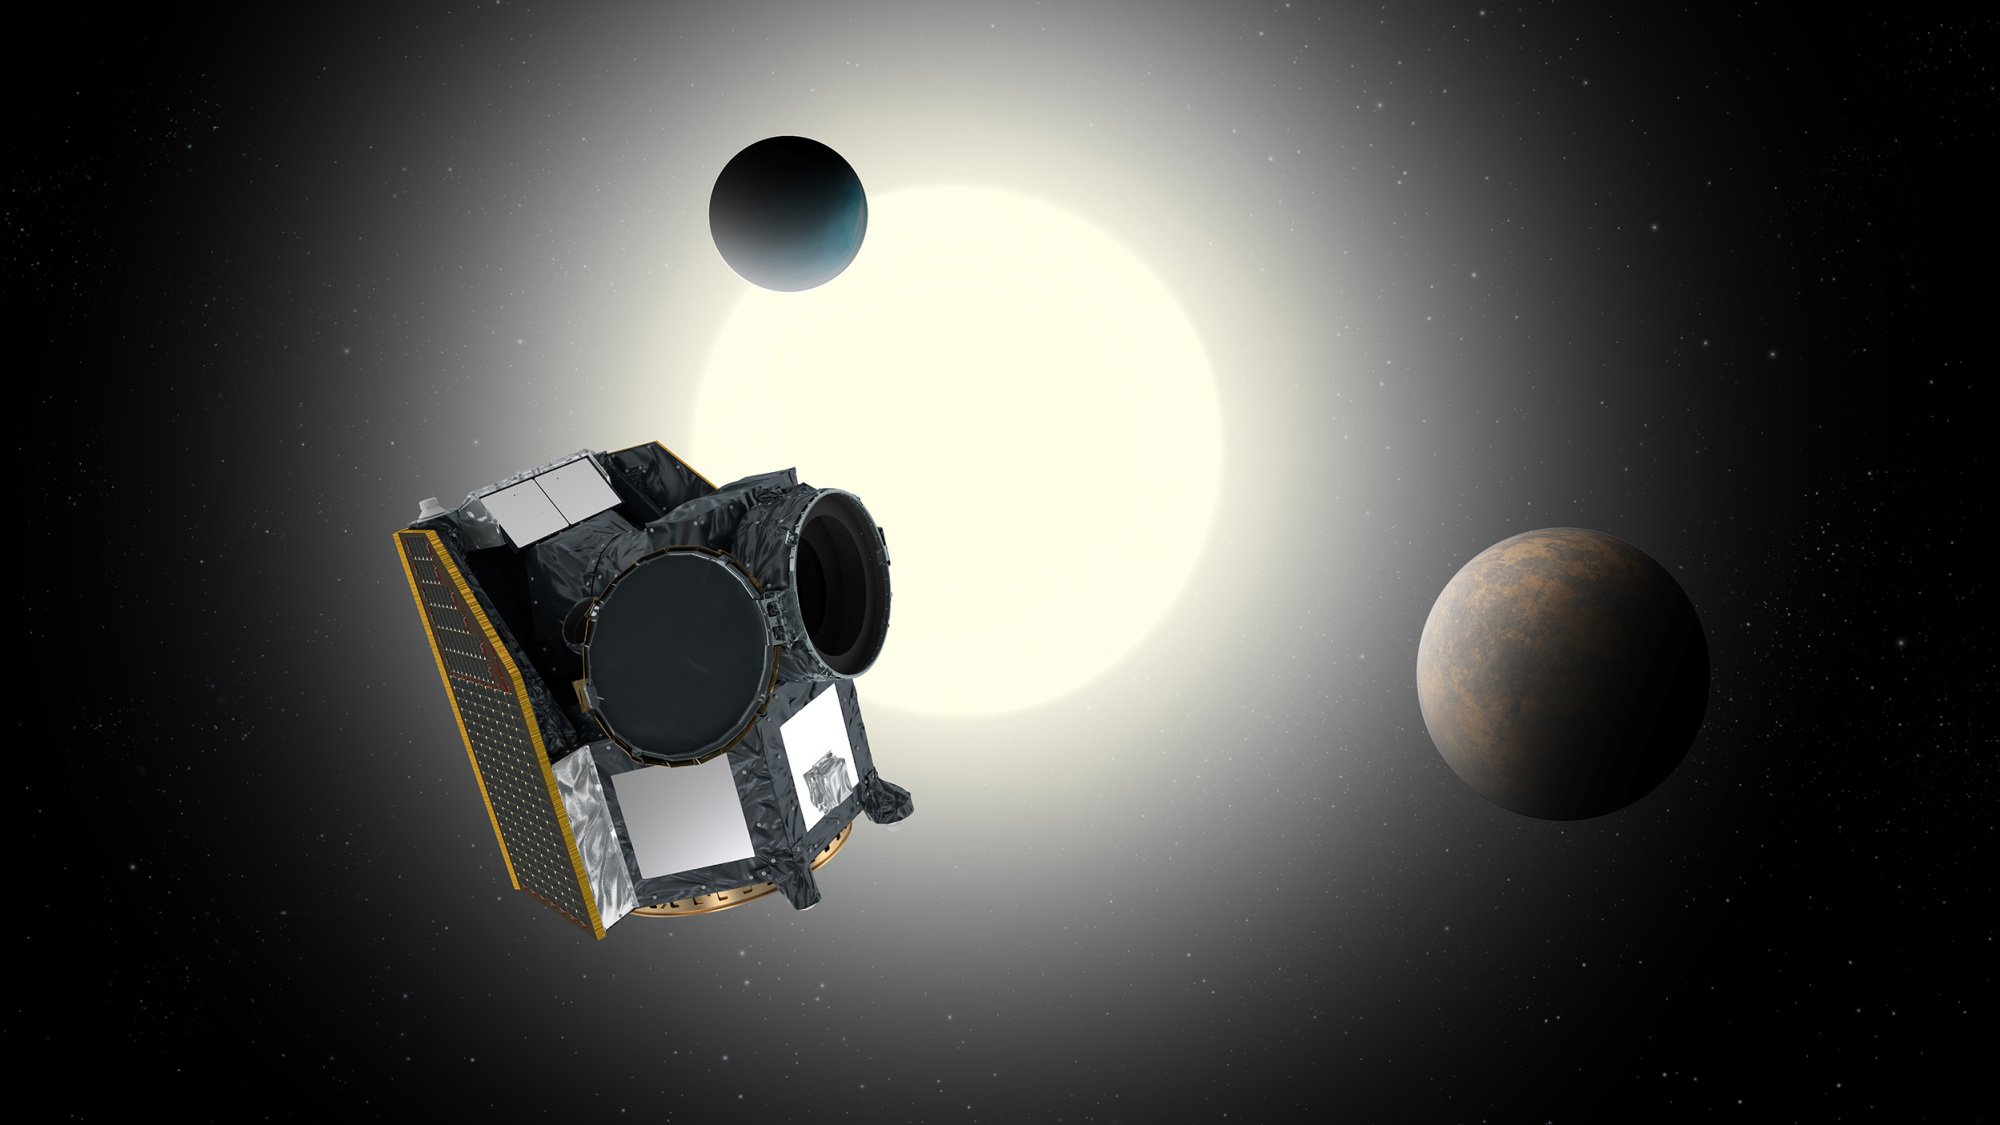 Cheops mission studying exoplanets